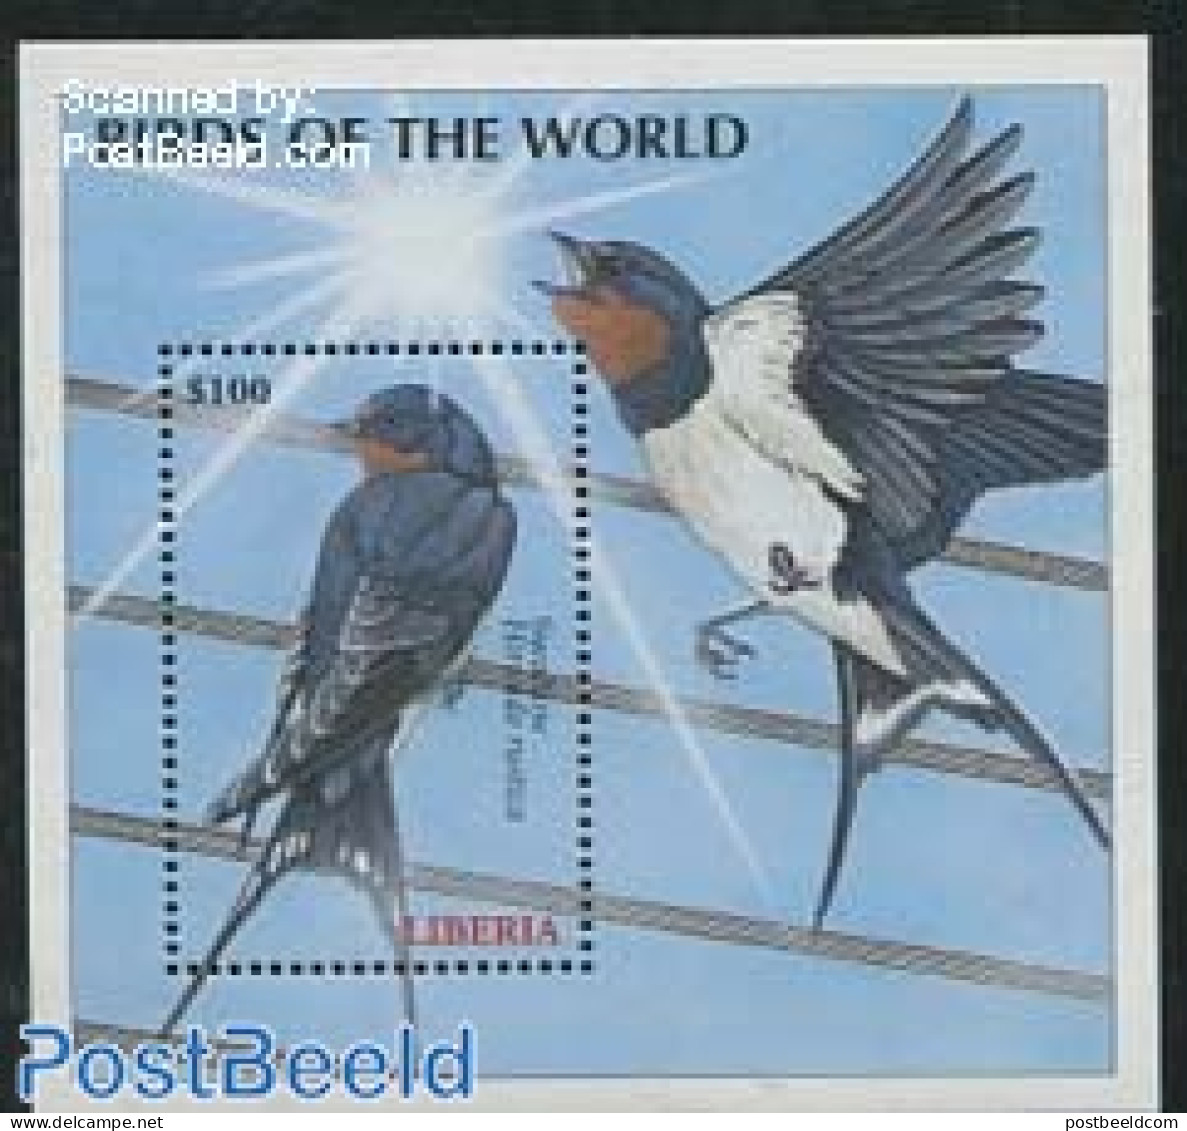 Liberia 2000 Swallow S/s, Mint NH, Nature - Birds - Other & Unclassified